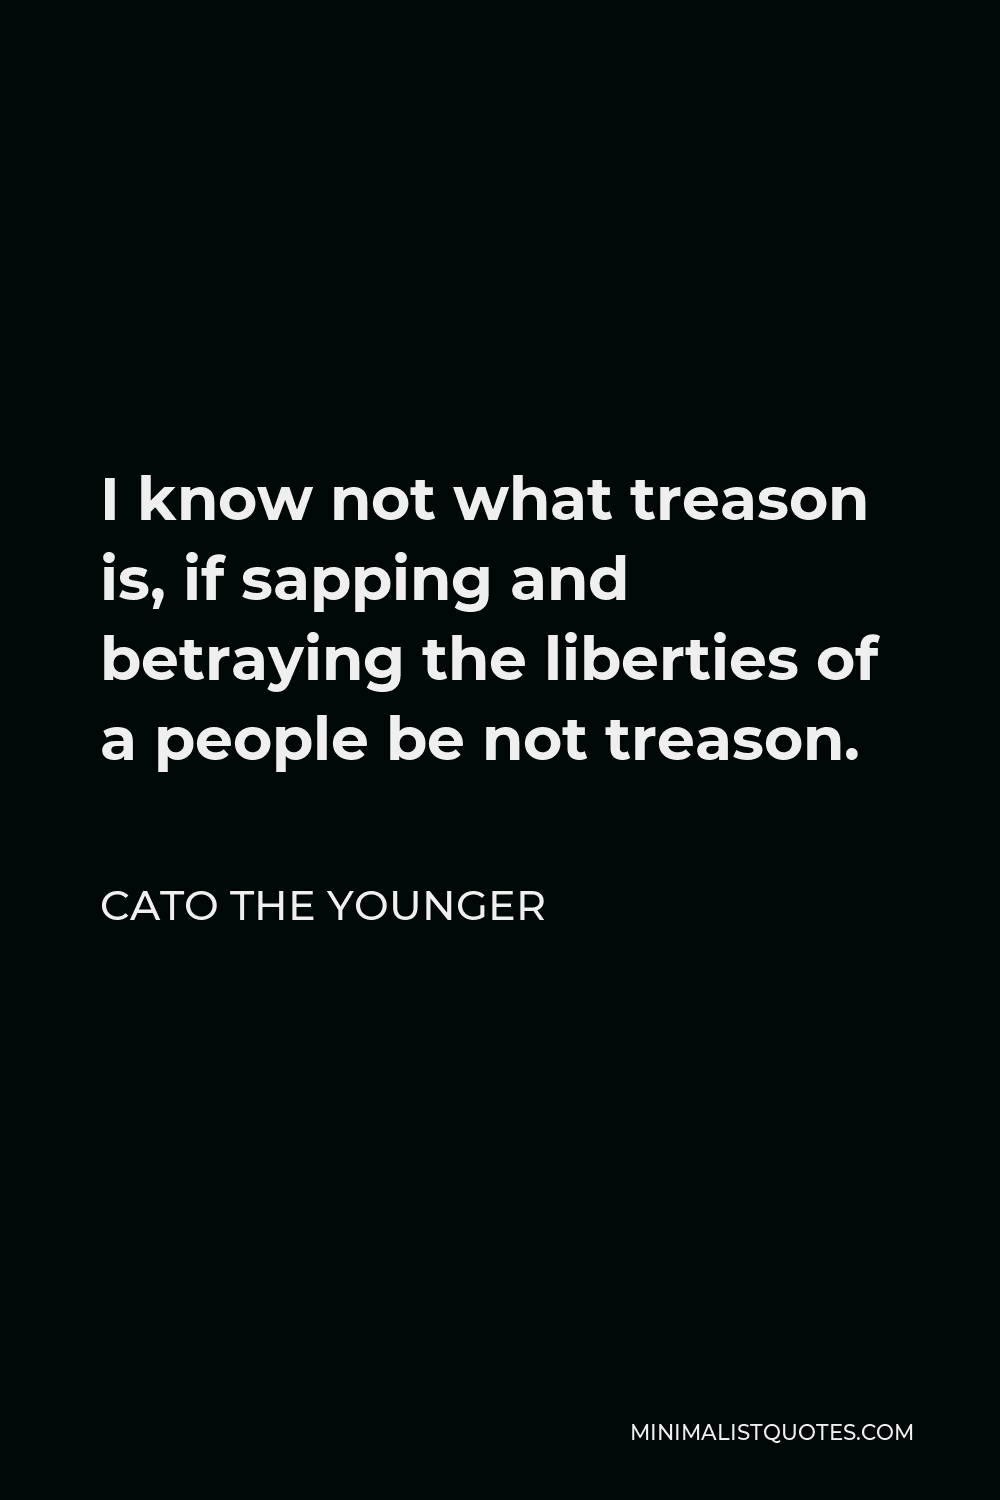 Cato the Younger Quote - I know not what treason is, if sapping and betraying the liberties of a people be not treason.